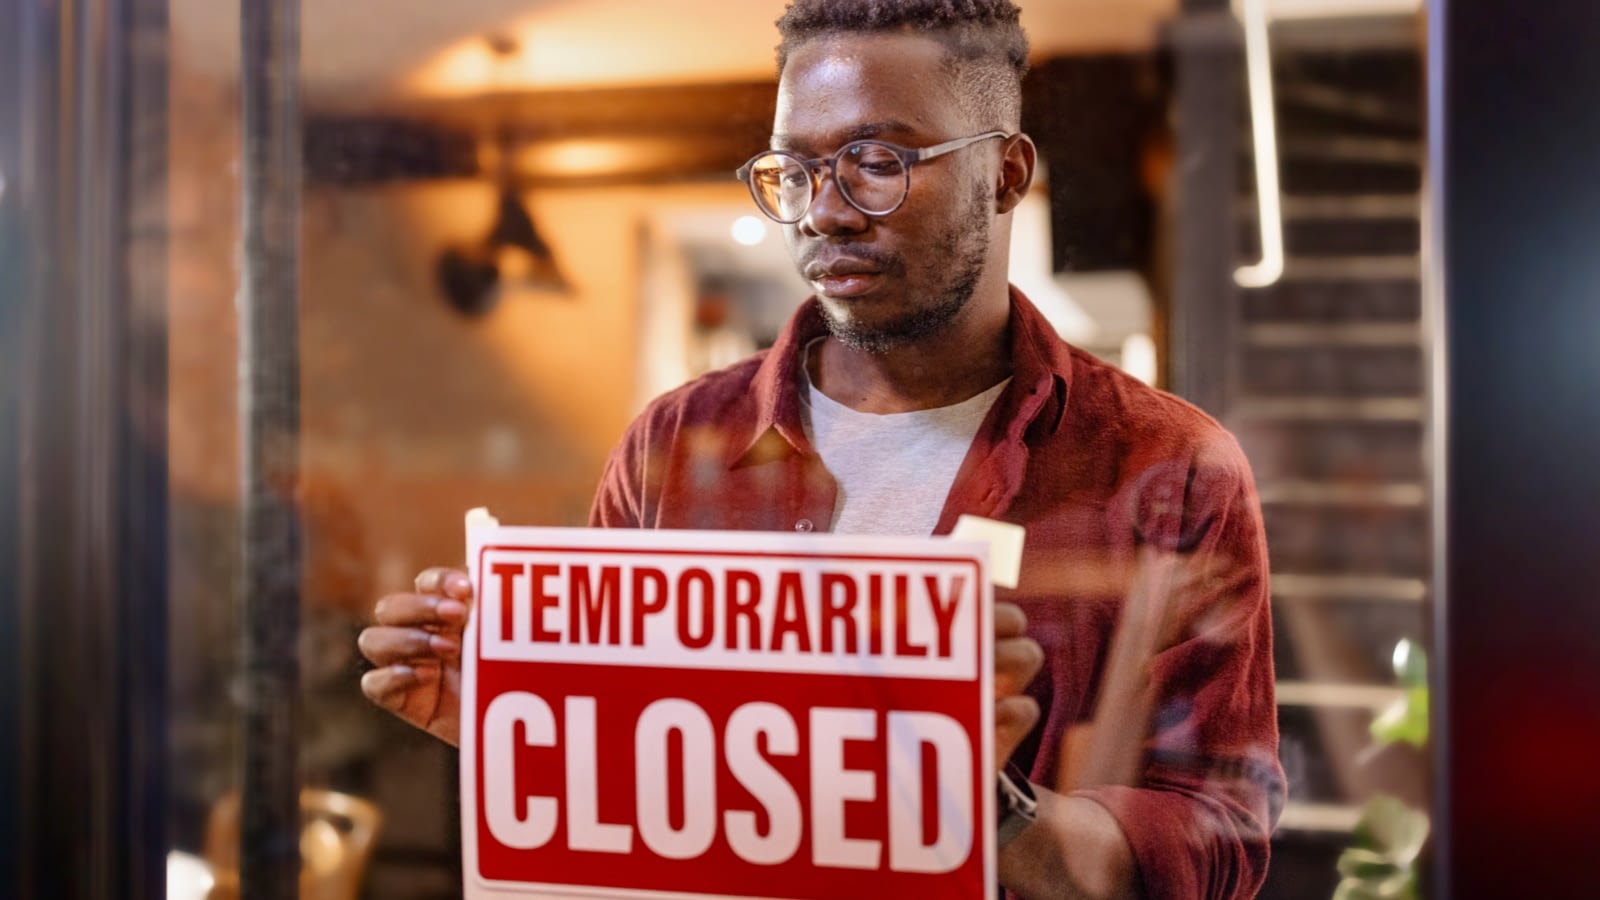 business owner putting up temporarily closed sign